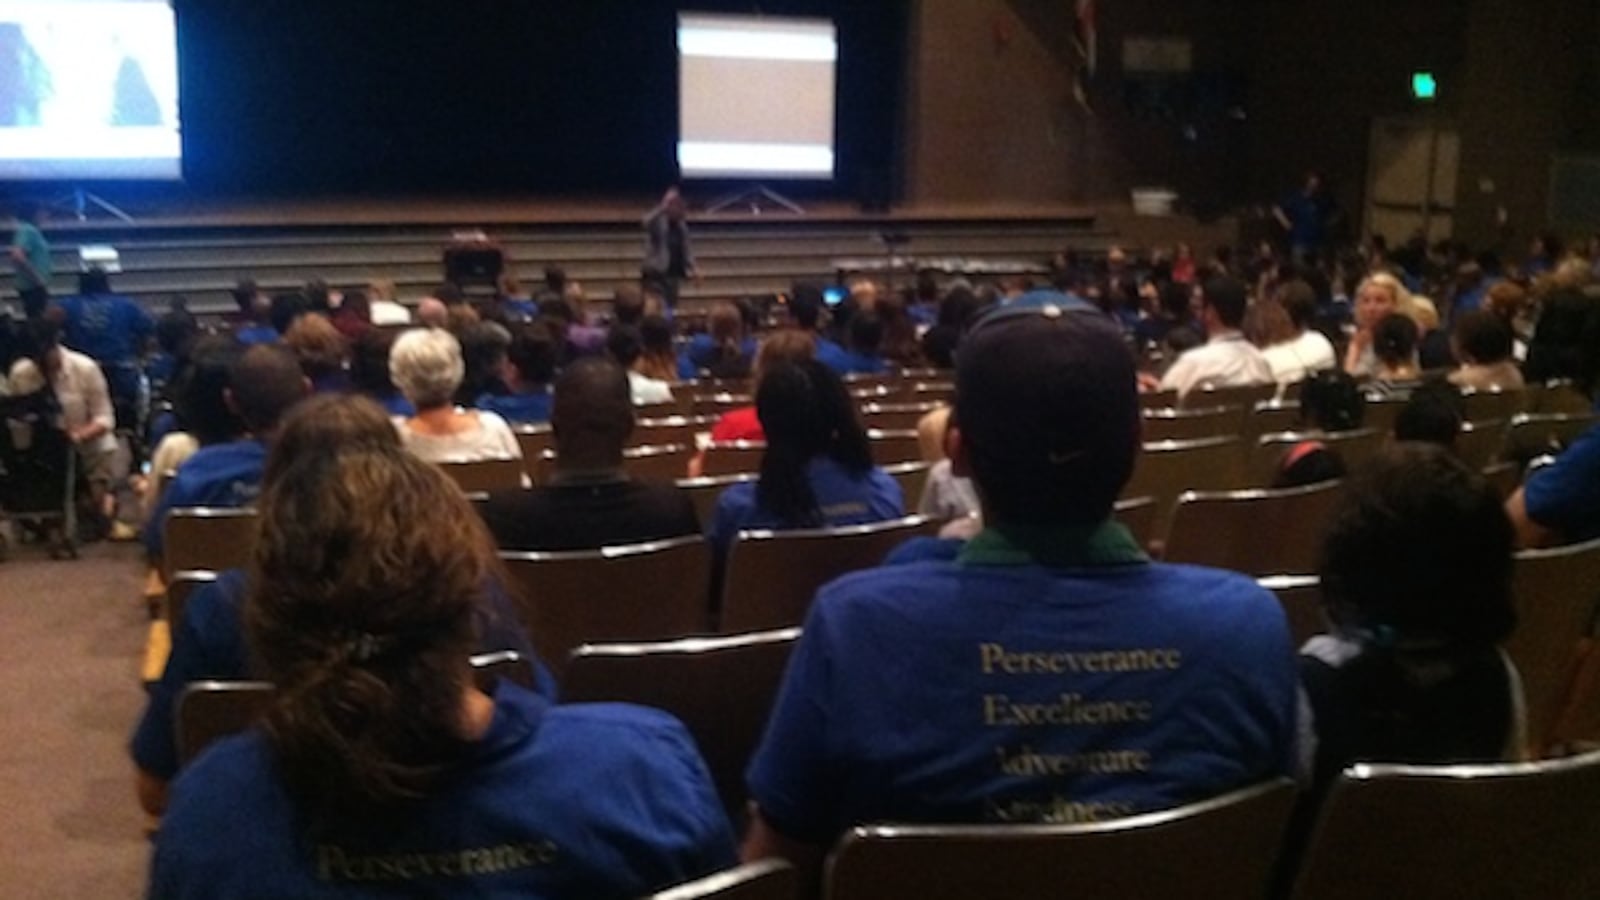 The blue t-shirts of Rocky Mountain Prep dominate the Hampden Heights community meeting.